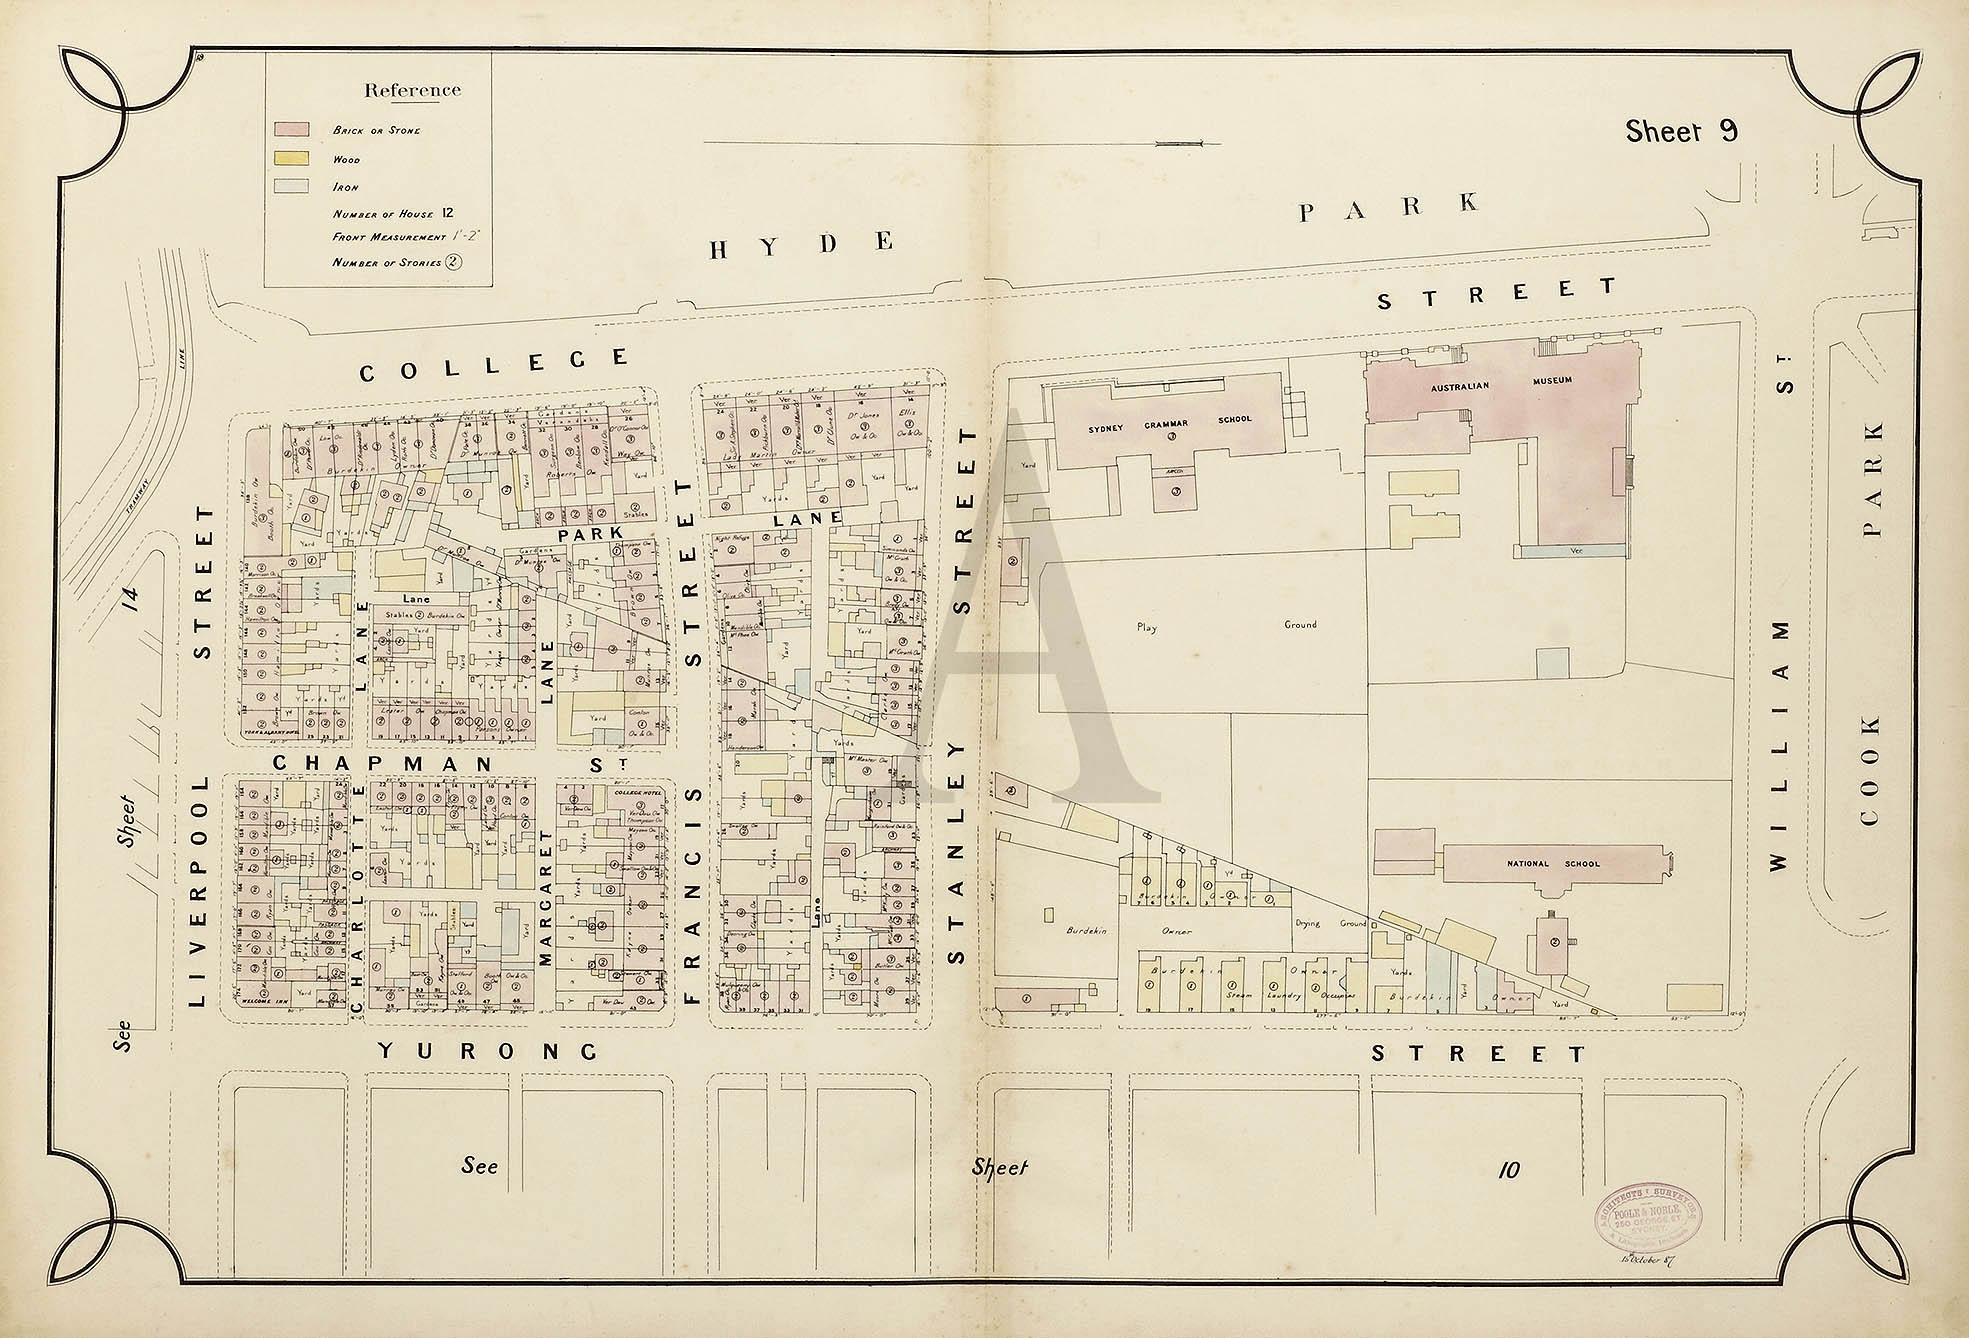 Untitled Sheet 9. 'East Sydney'. - Antique Map from 1887